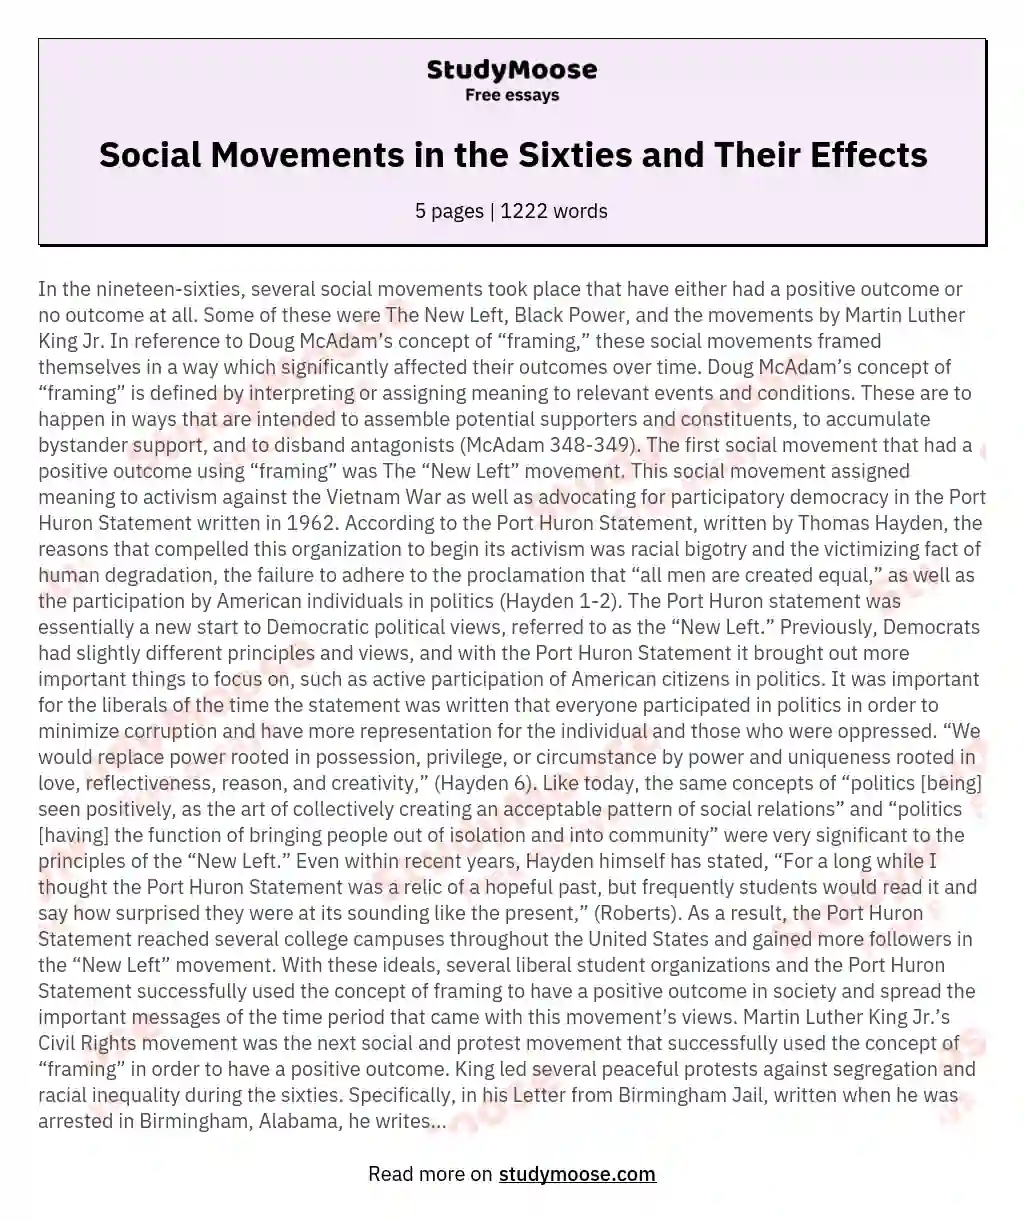 Social Movements in the Sixties and Their Effects essay